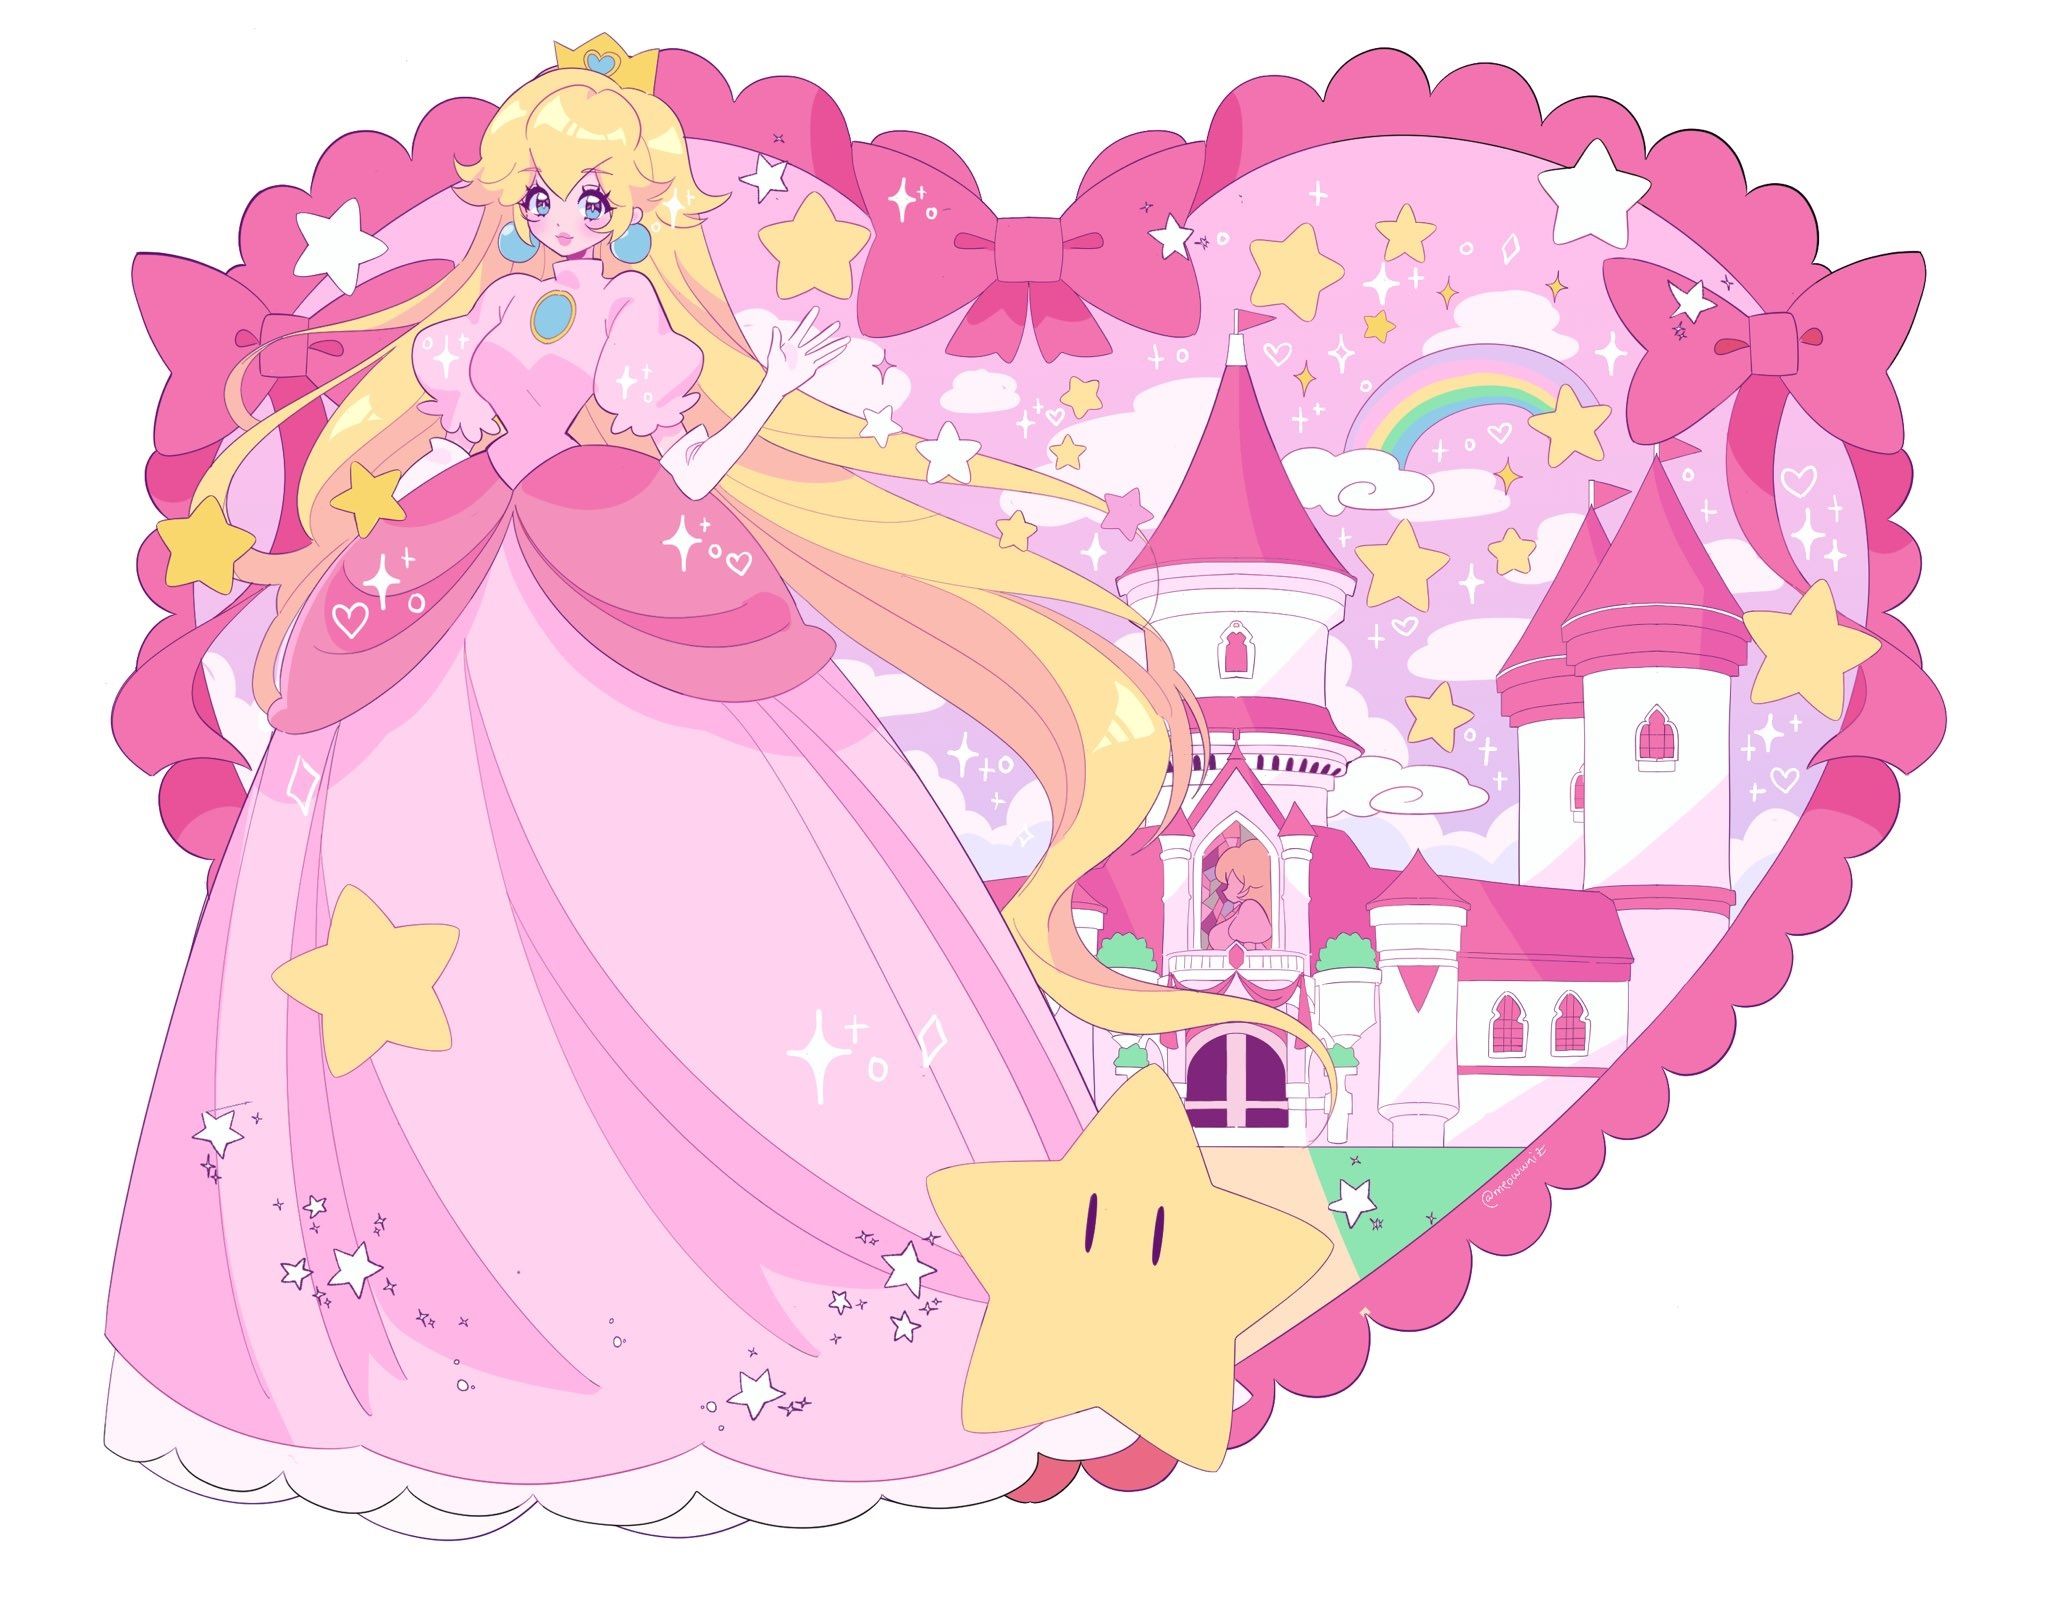 A pink-haired anime princess in a pink dress stands in front of a pink castle. - Princess Peach